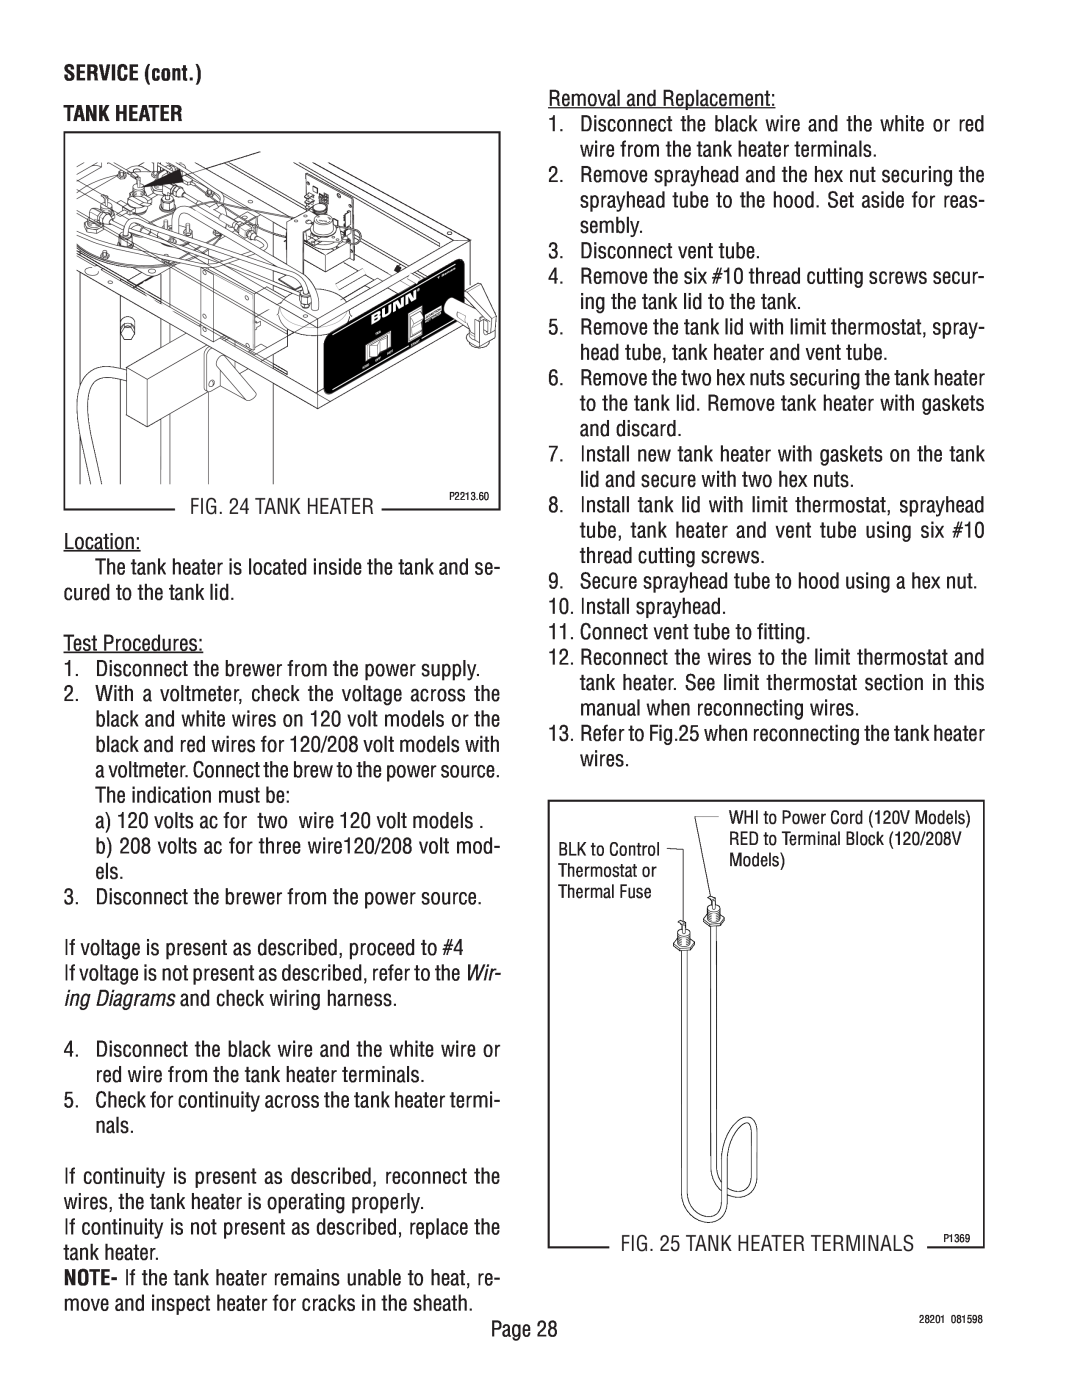 Bunn TNTF-3 service manual SERVICE cont, Disconnect the brewer from the power supply, Tank Heater Terminals 